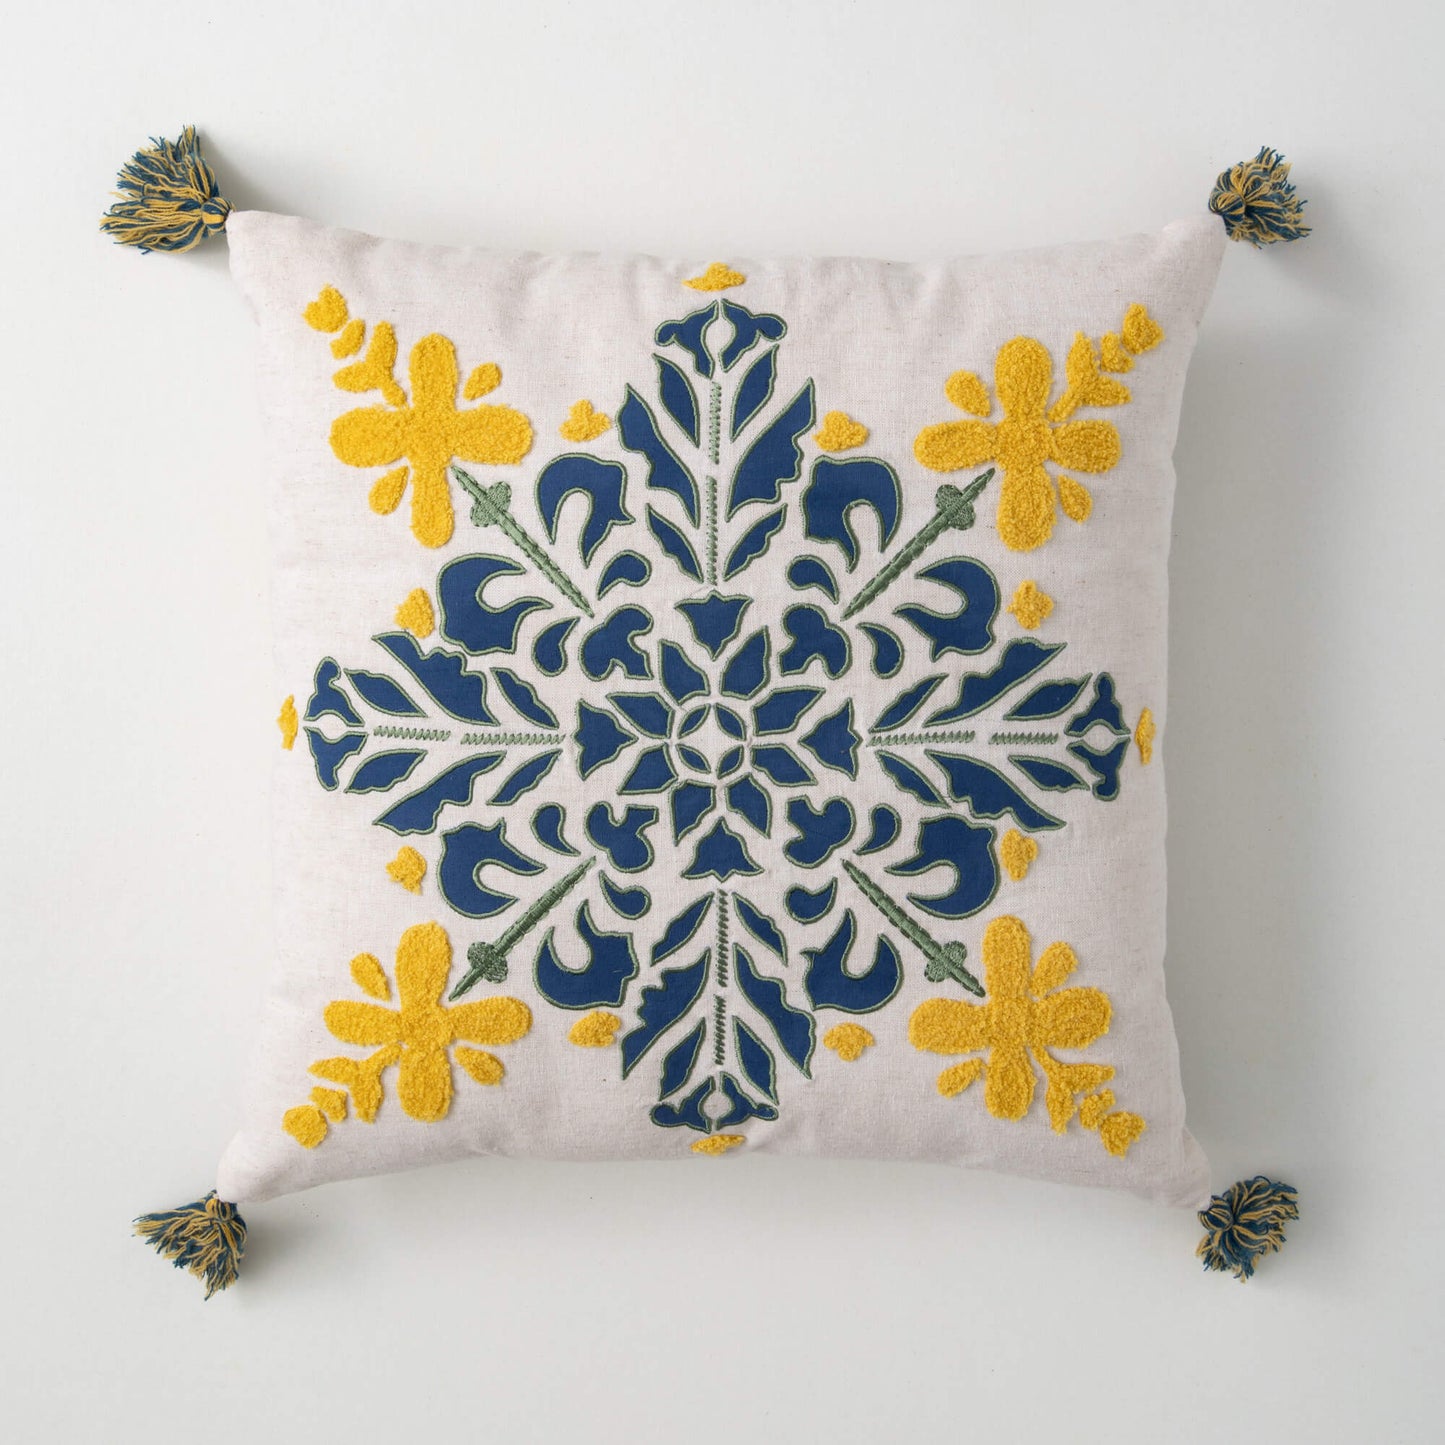 off-white pillow with blue and yellow floral mandala design.